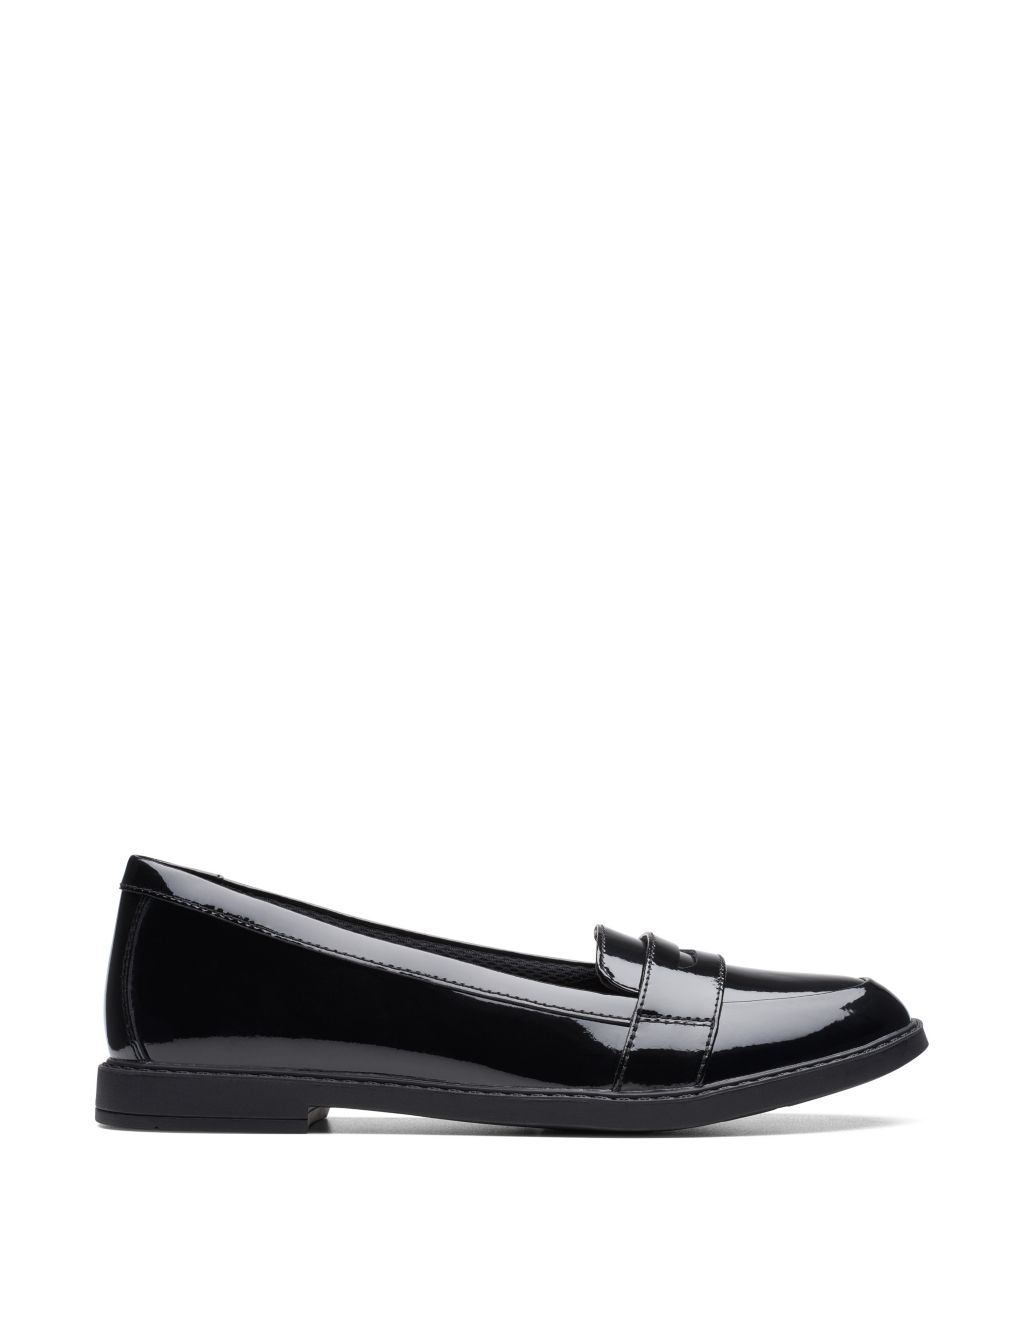 Kids' Patent Leather Slip-On Loafers (3 Small - 8 Small) image 1